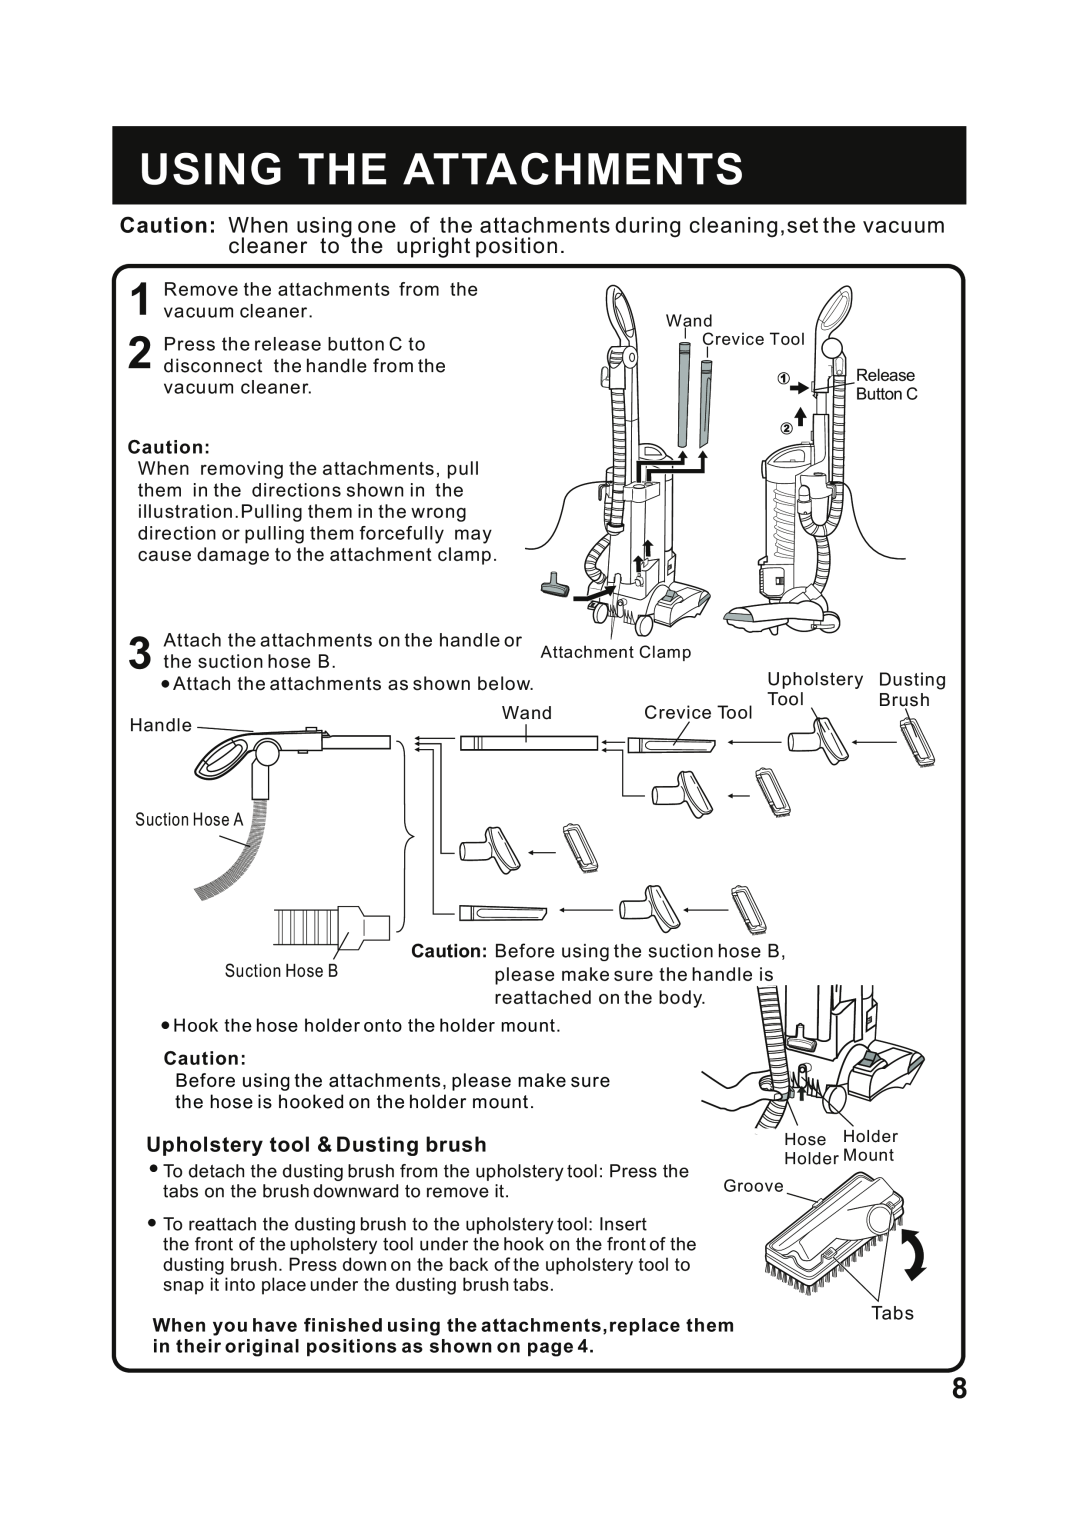 Fantom Vacuum FM741HR instruction manual Using The Attachments, Upholstery tool & Dusting brush 